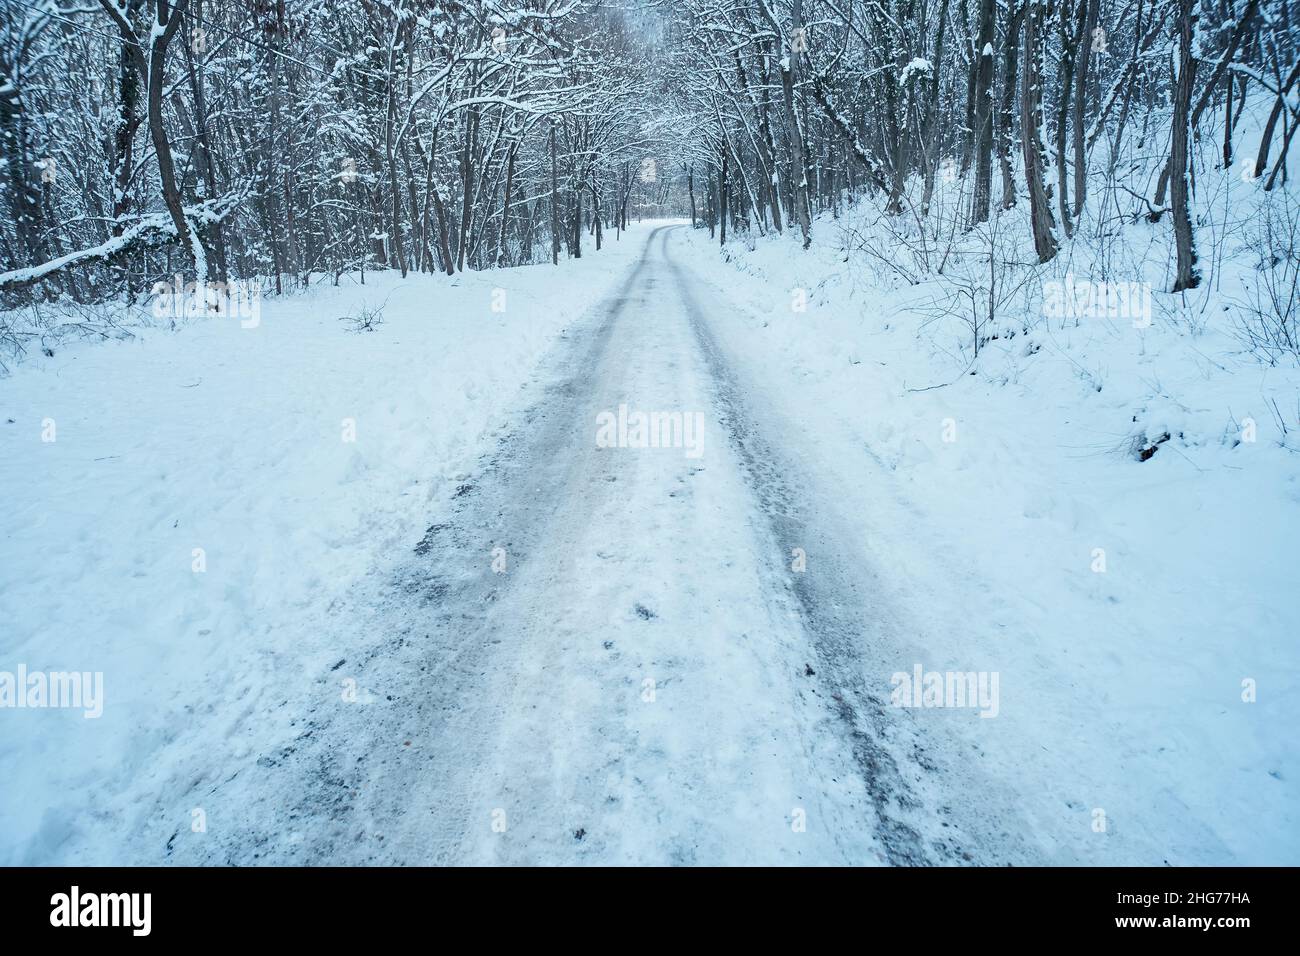 Snowy forest road in winter conditions Stock Photo